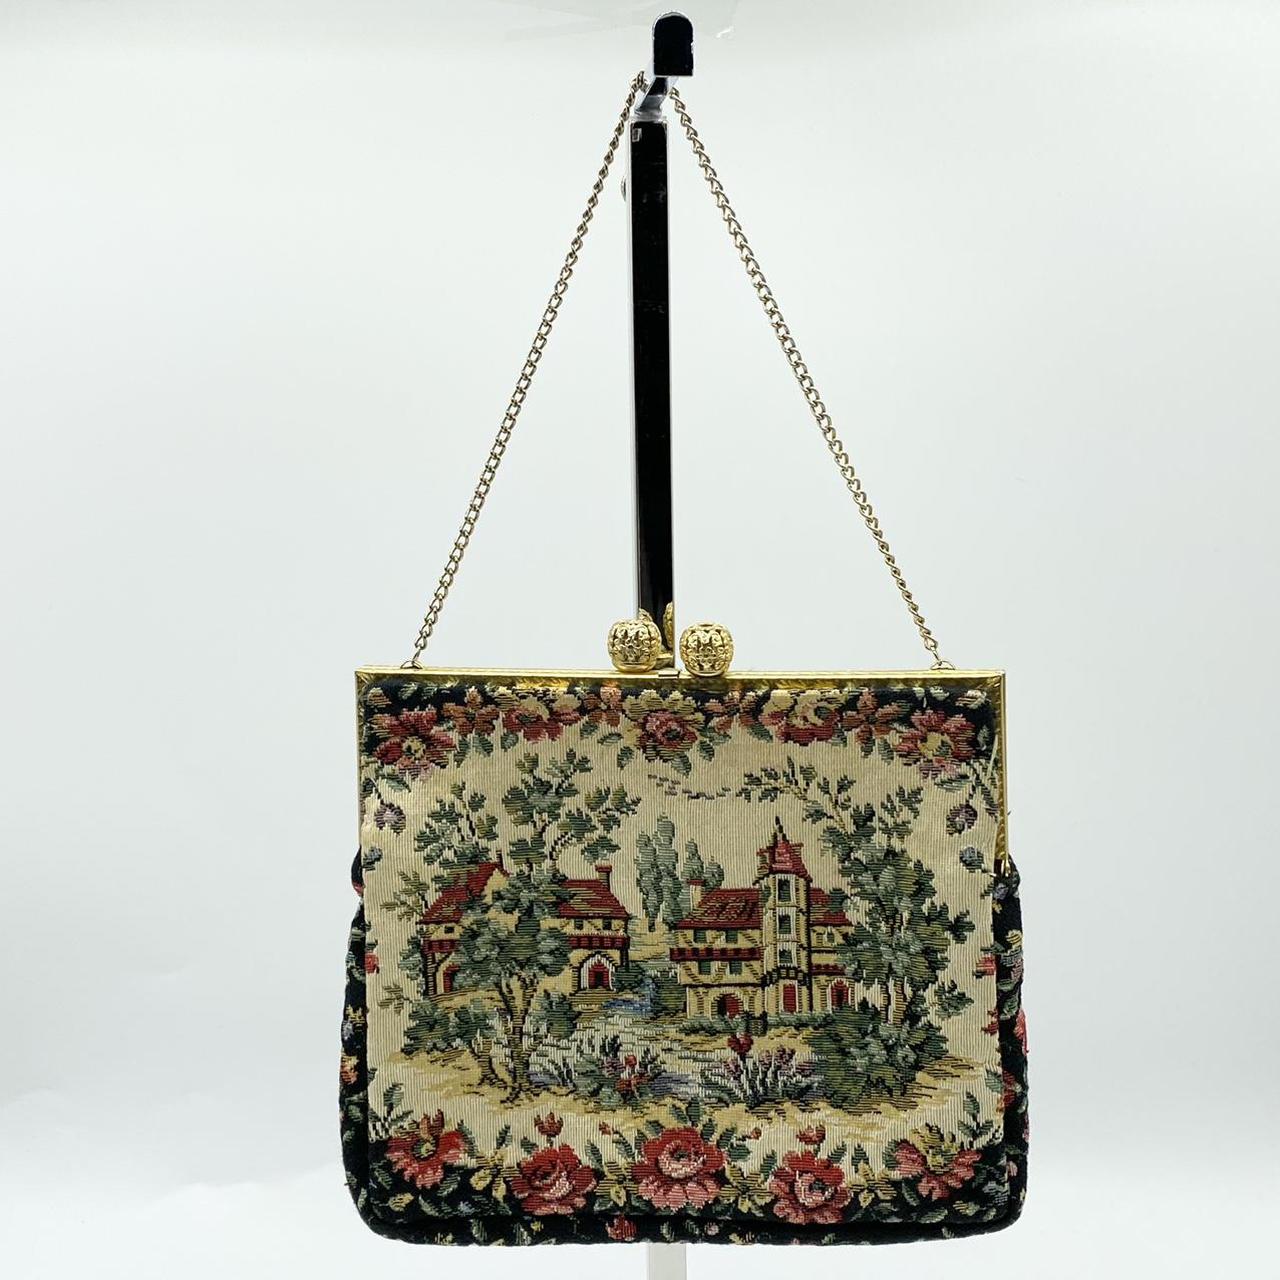 Product Image 2 - Absolutely beautiful 1940’s tapestry bag!